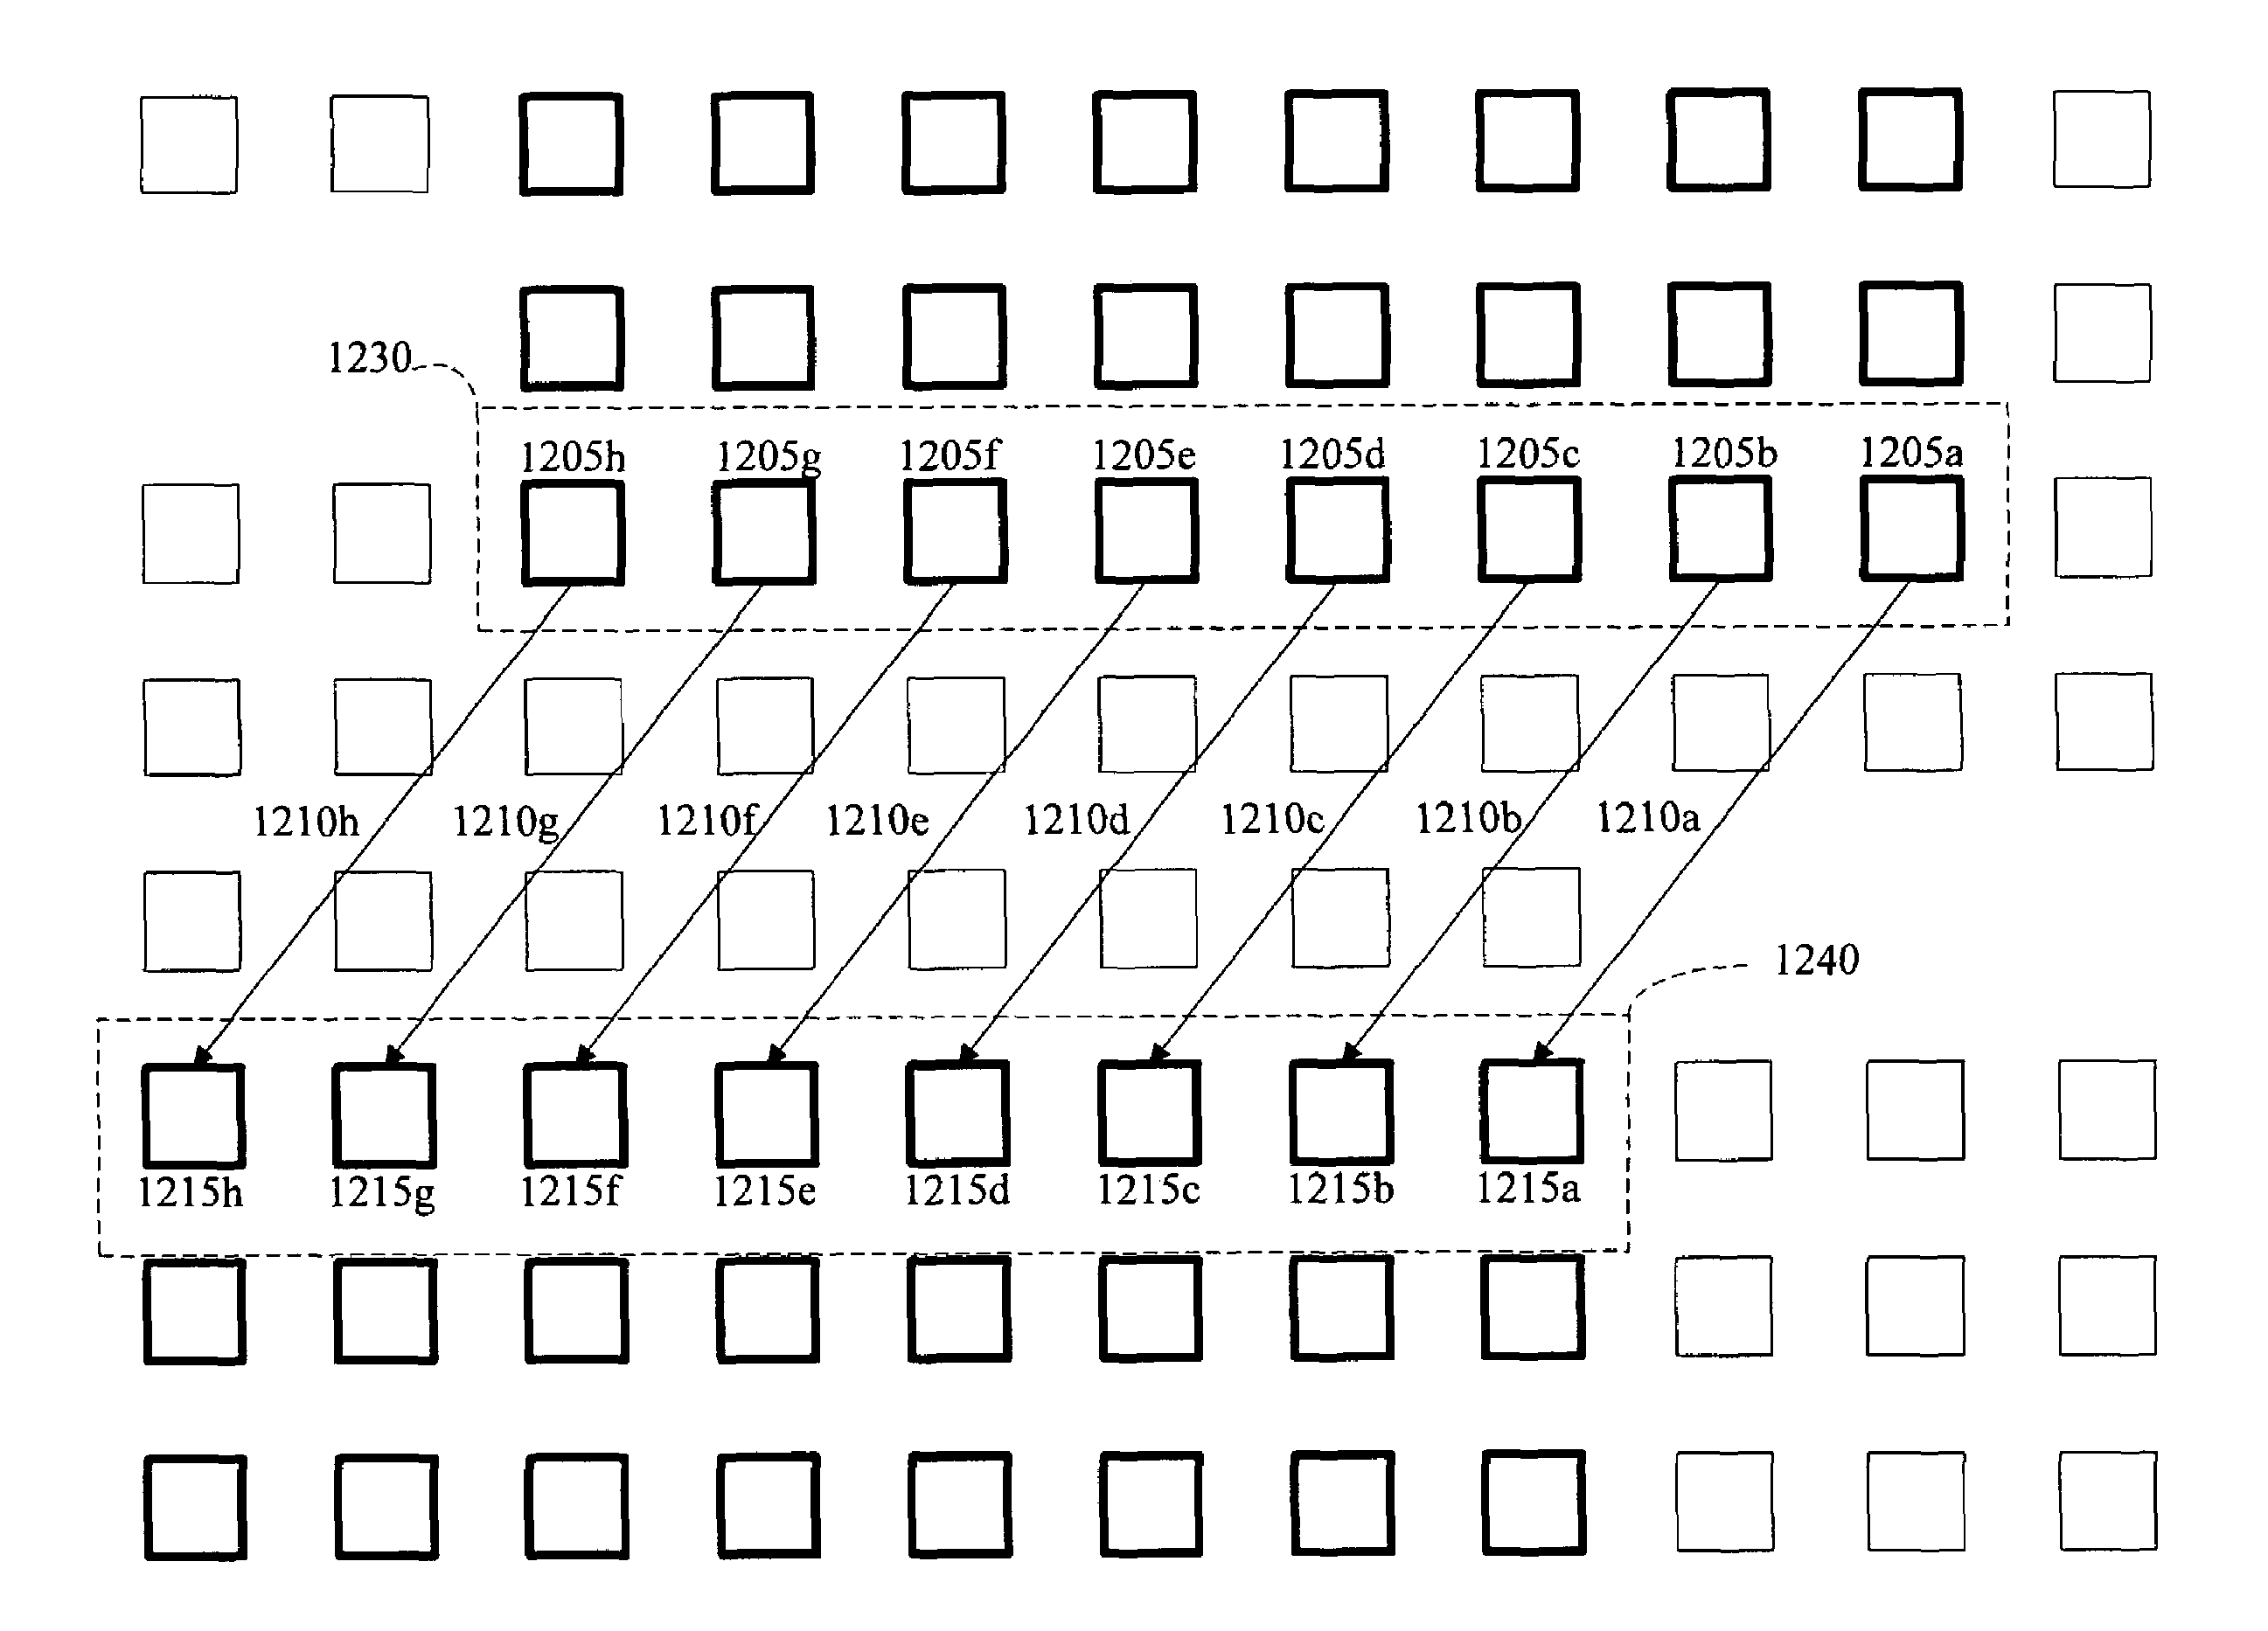 Barrel shifter implemented on a configurable integrated circuit